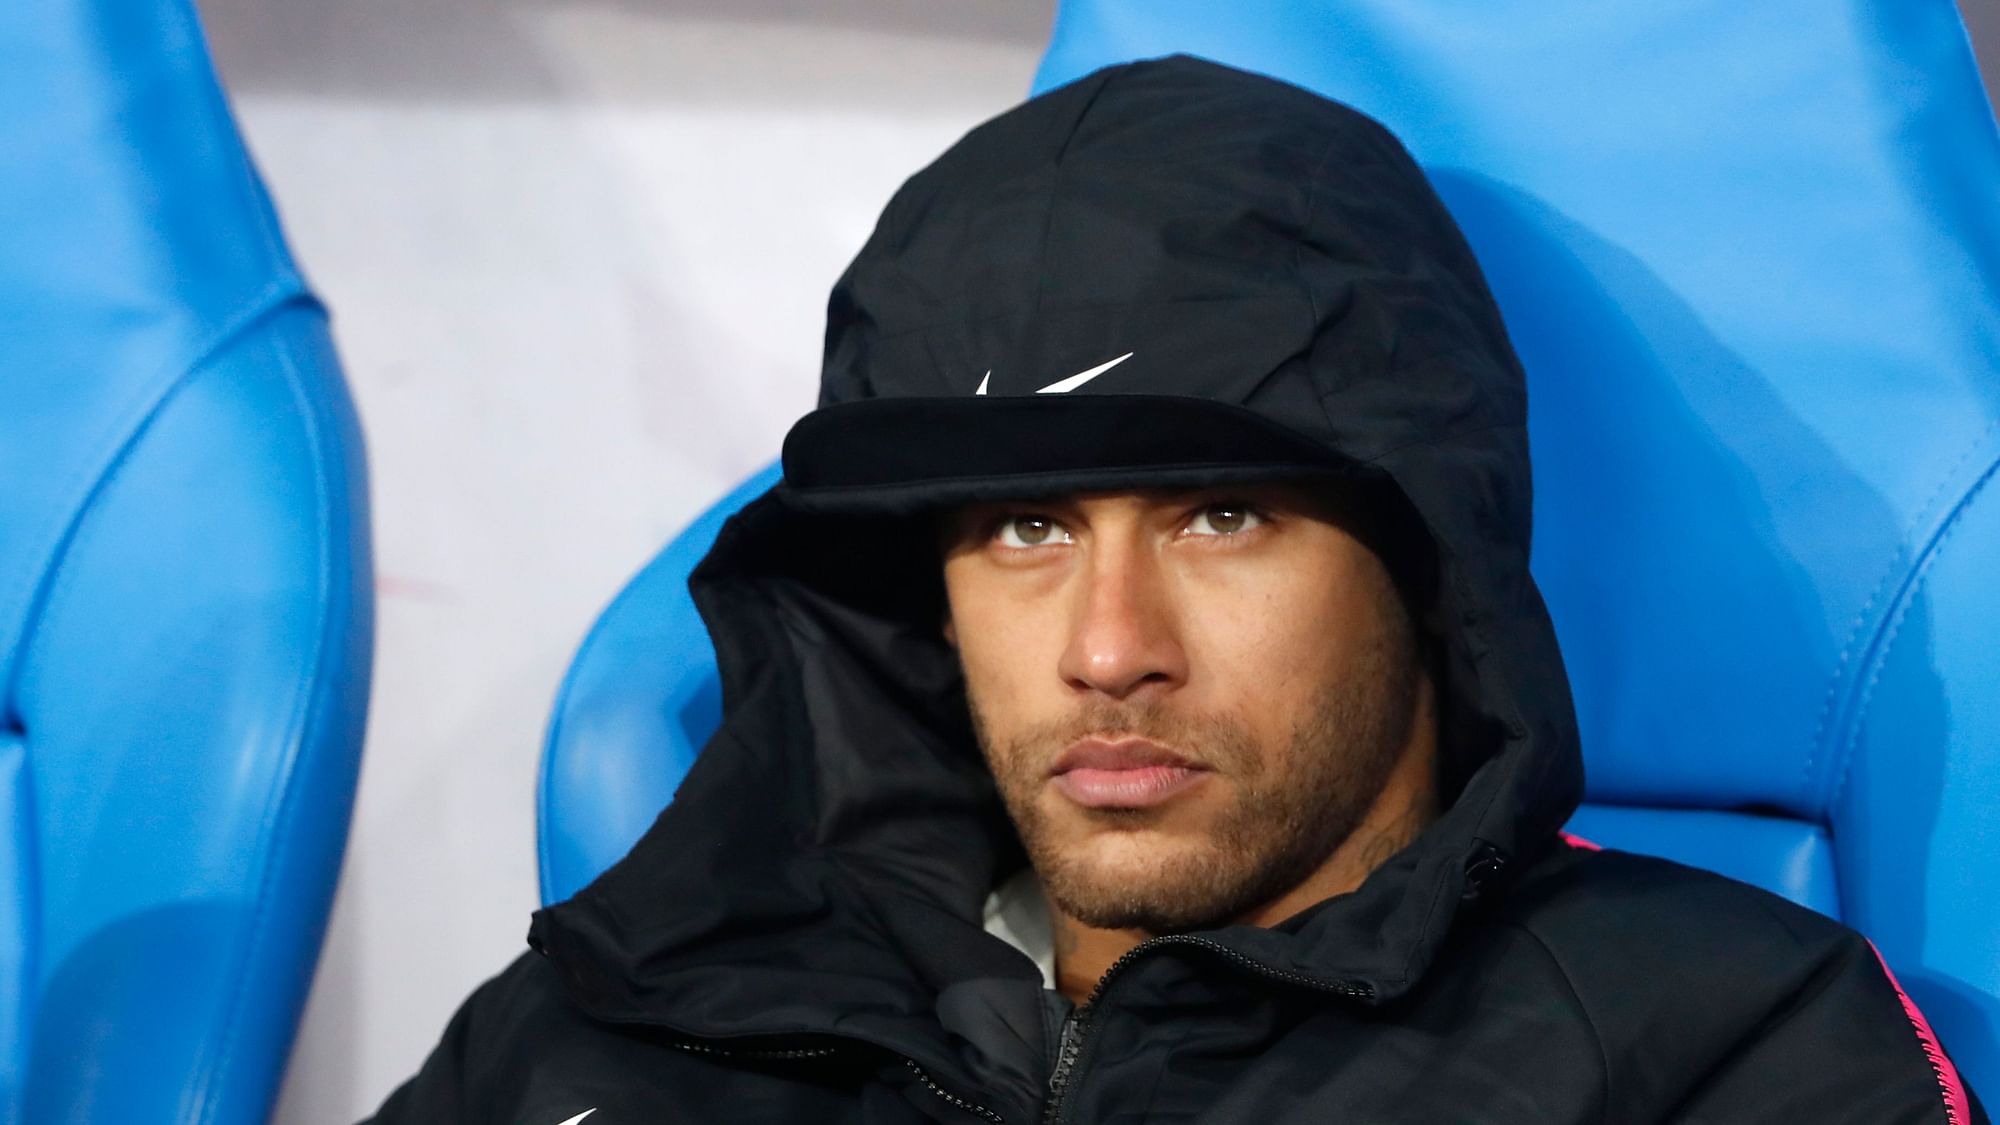 Neymar appeared to aim a punch at a fan goading him and other Paris Saint-Germain players with provocative language.